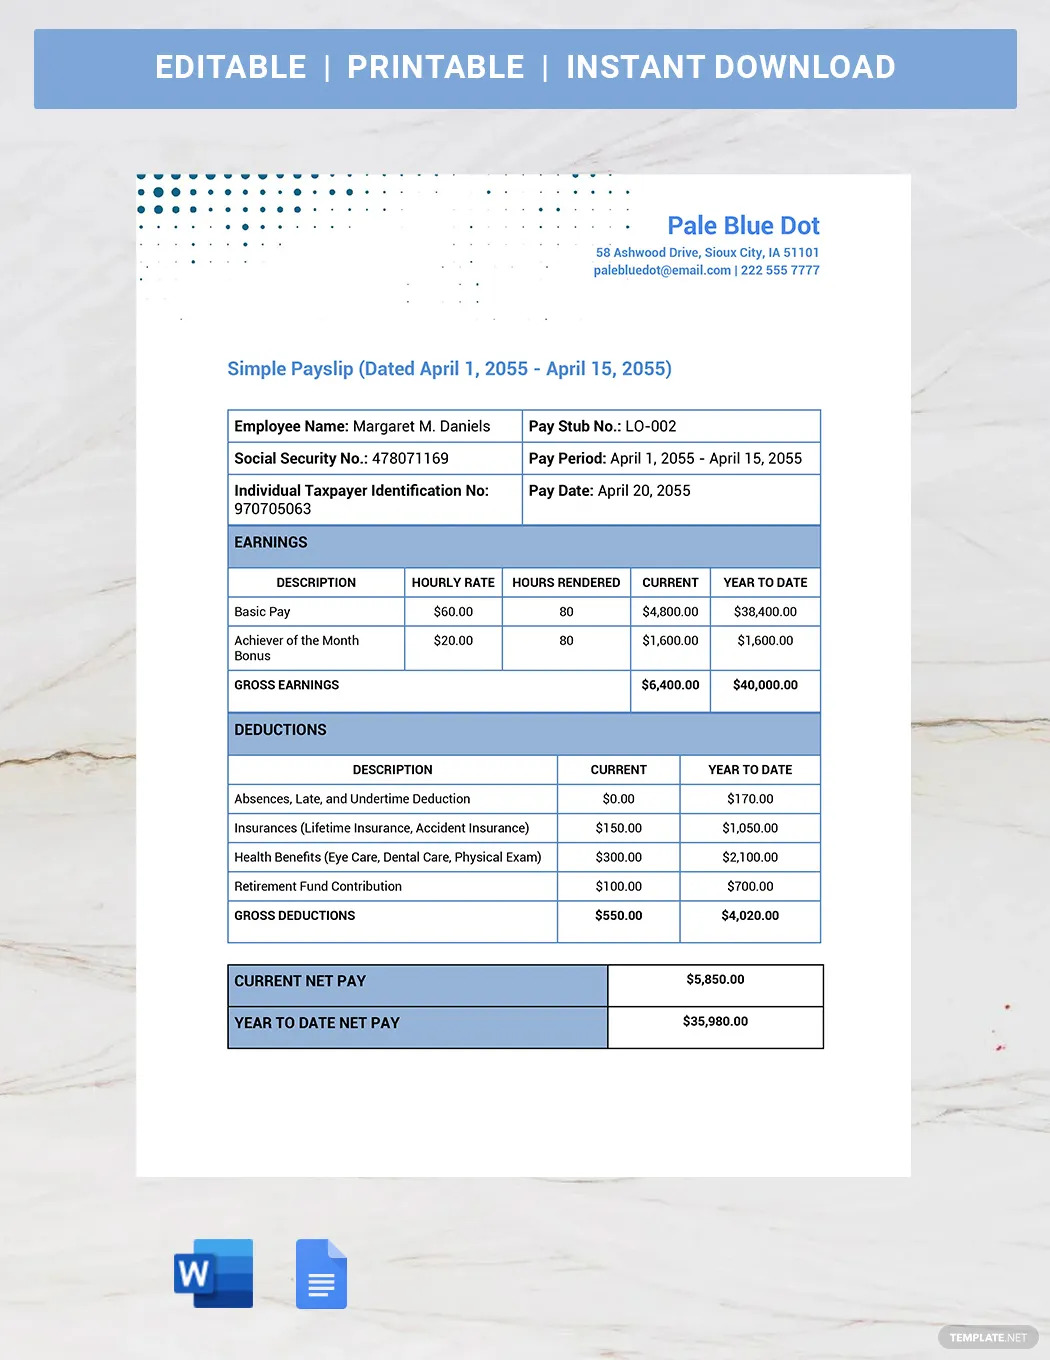 simple payslip ideas and examples